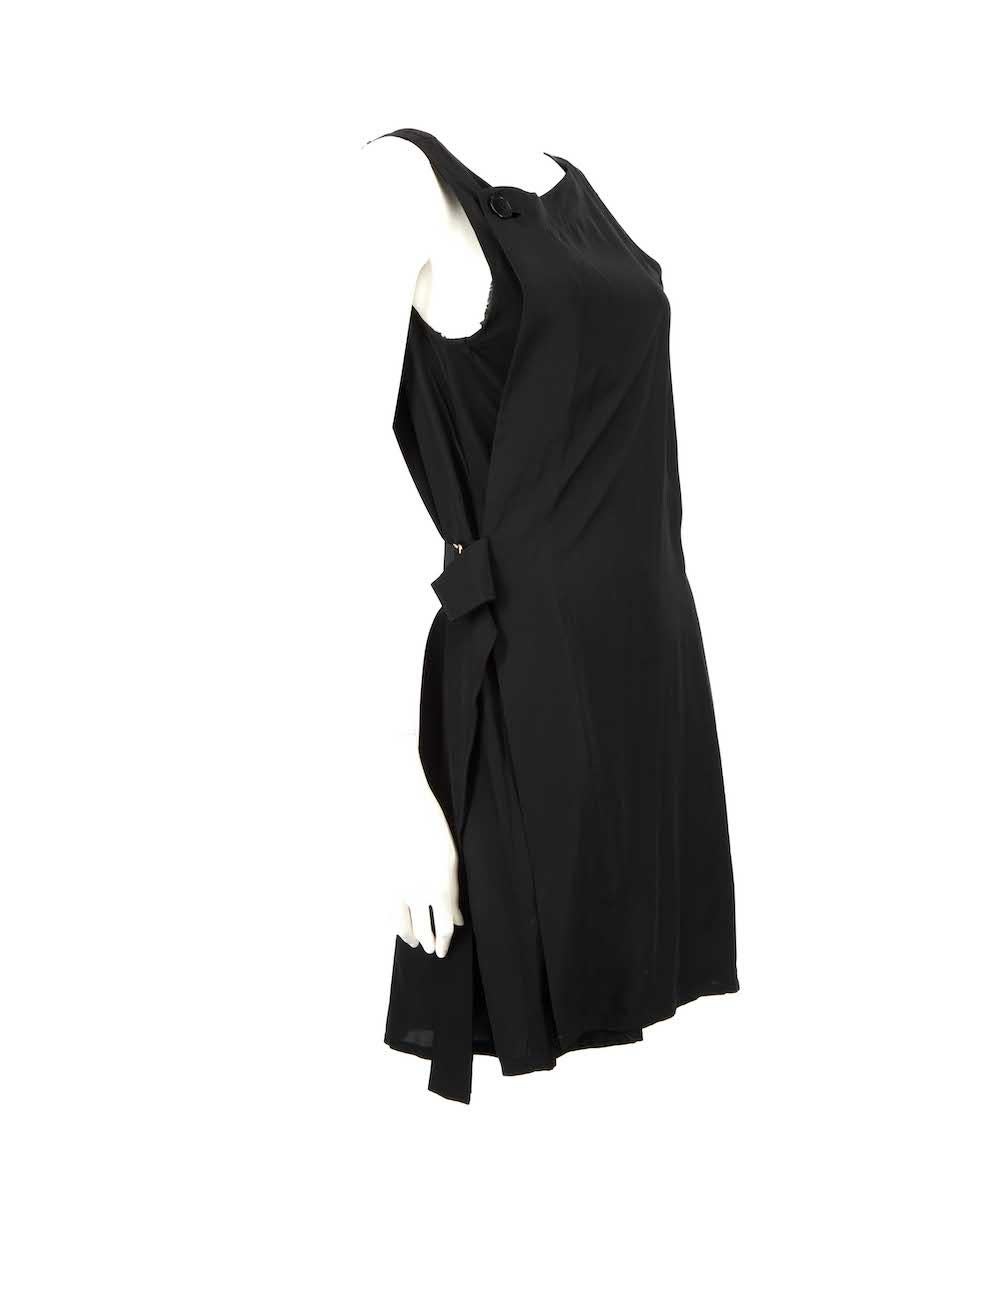 CONDITION is Good. Minor wear to dress is evident. Light wear to the underarm seams where the raw-edge has come untucked and there is a small pluck to the weave at the front on this used Y's by Yohji Yamamoto designer resale item.
 
 
 
 Details
 
